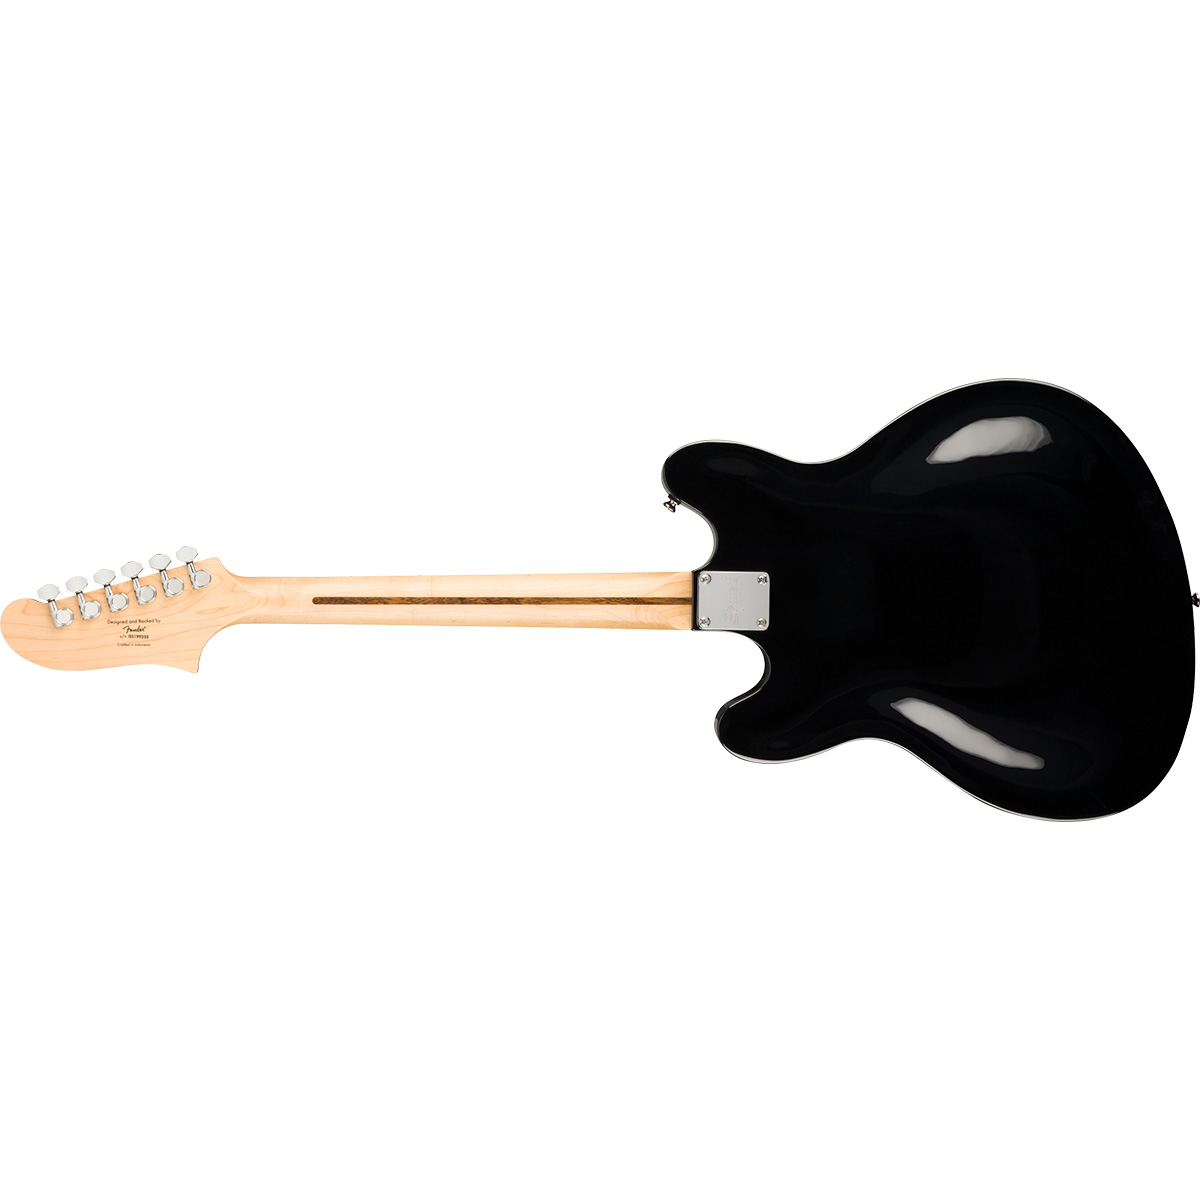 Squier by Fender Affinity Series Starcaster Maple Fingerboard